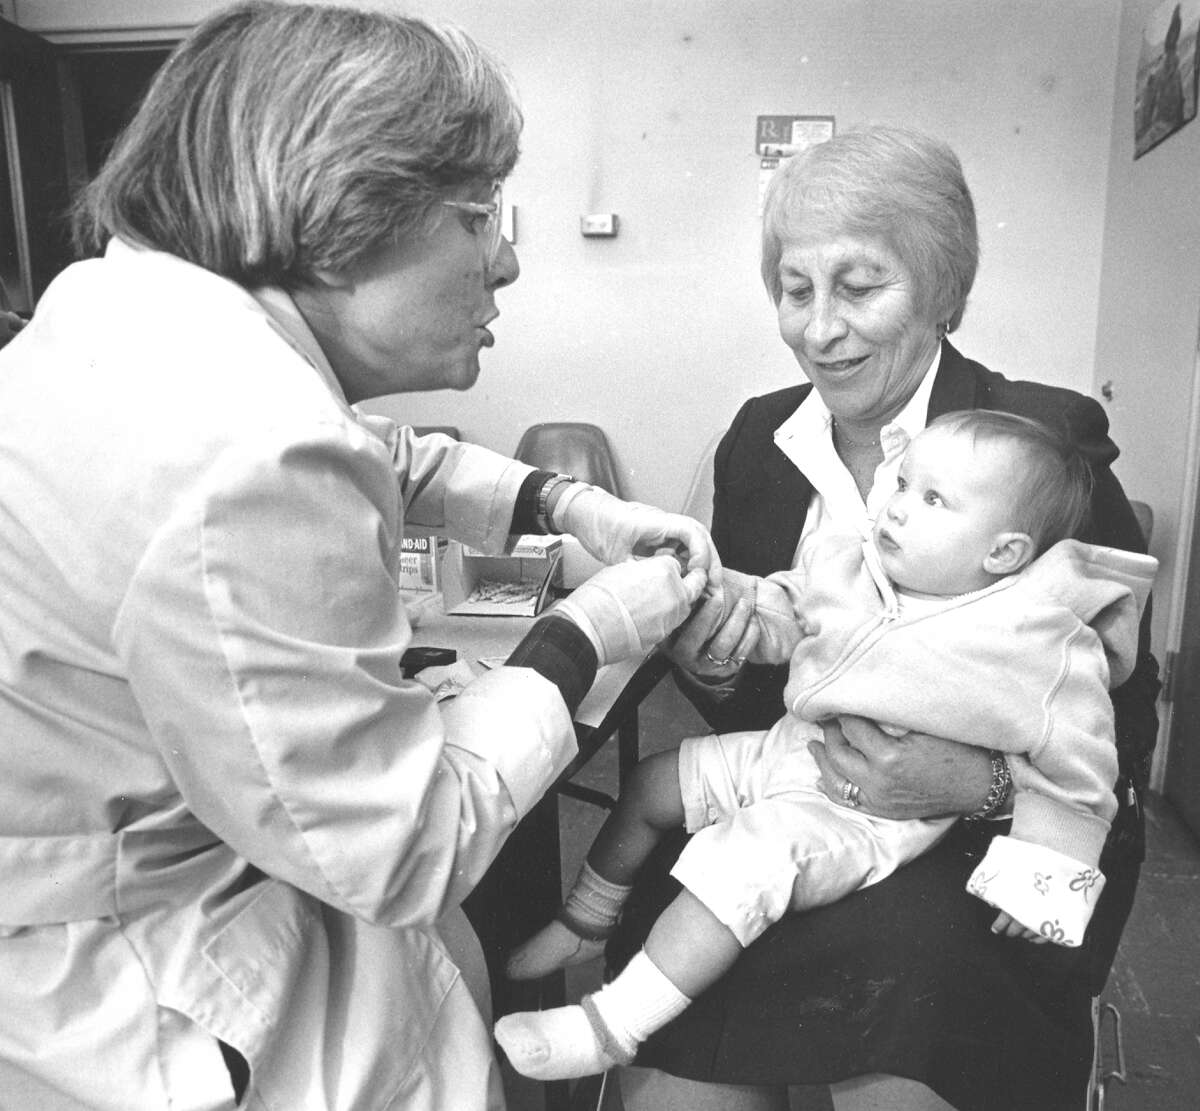 Lee Stoogenke, a lab technician for the Stamford Health Department, does a blood test on 9-month-old Sheila Coperine, whose mother was a teacher at K.T. Murphy School, which was closed due to high lead levels. Holding Sheila is Springdale School nurse Estelle Skigen.